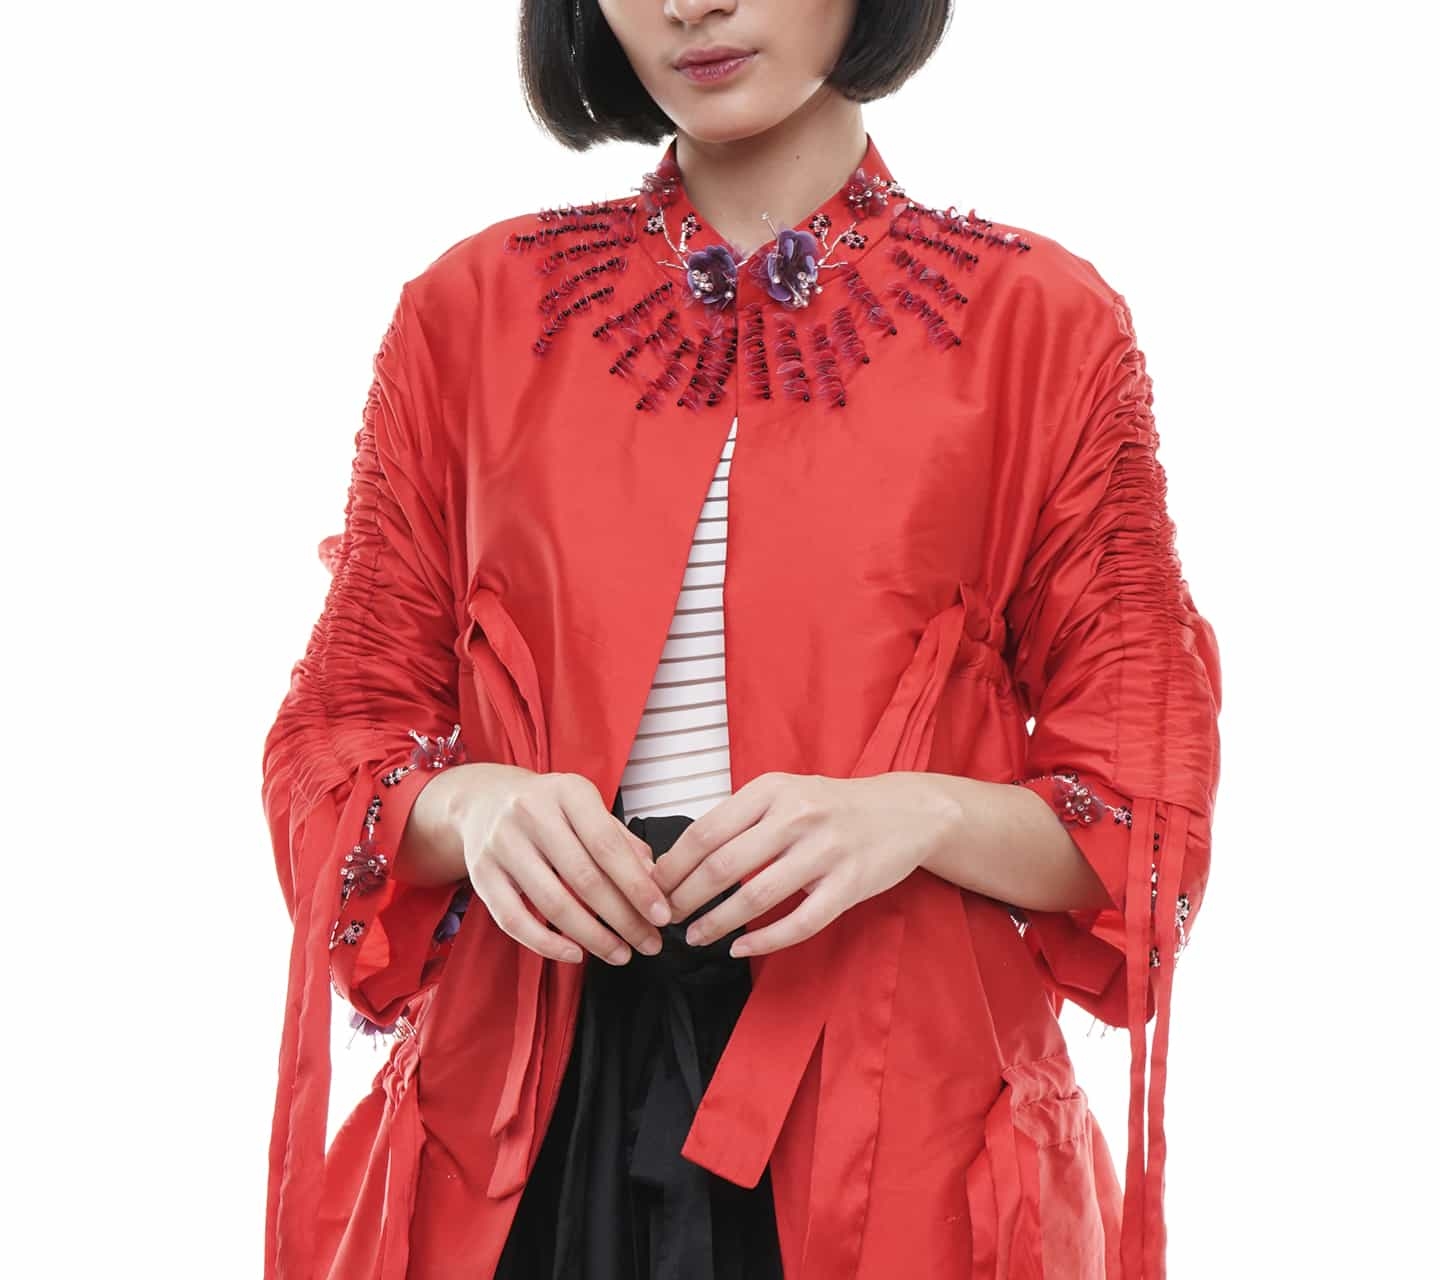 Sebe11as Red with Beads Outerwear